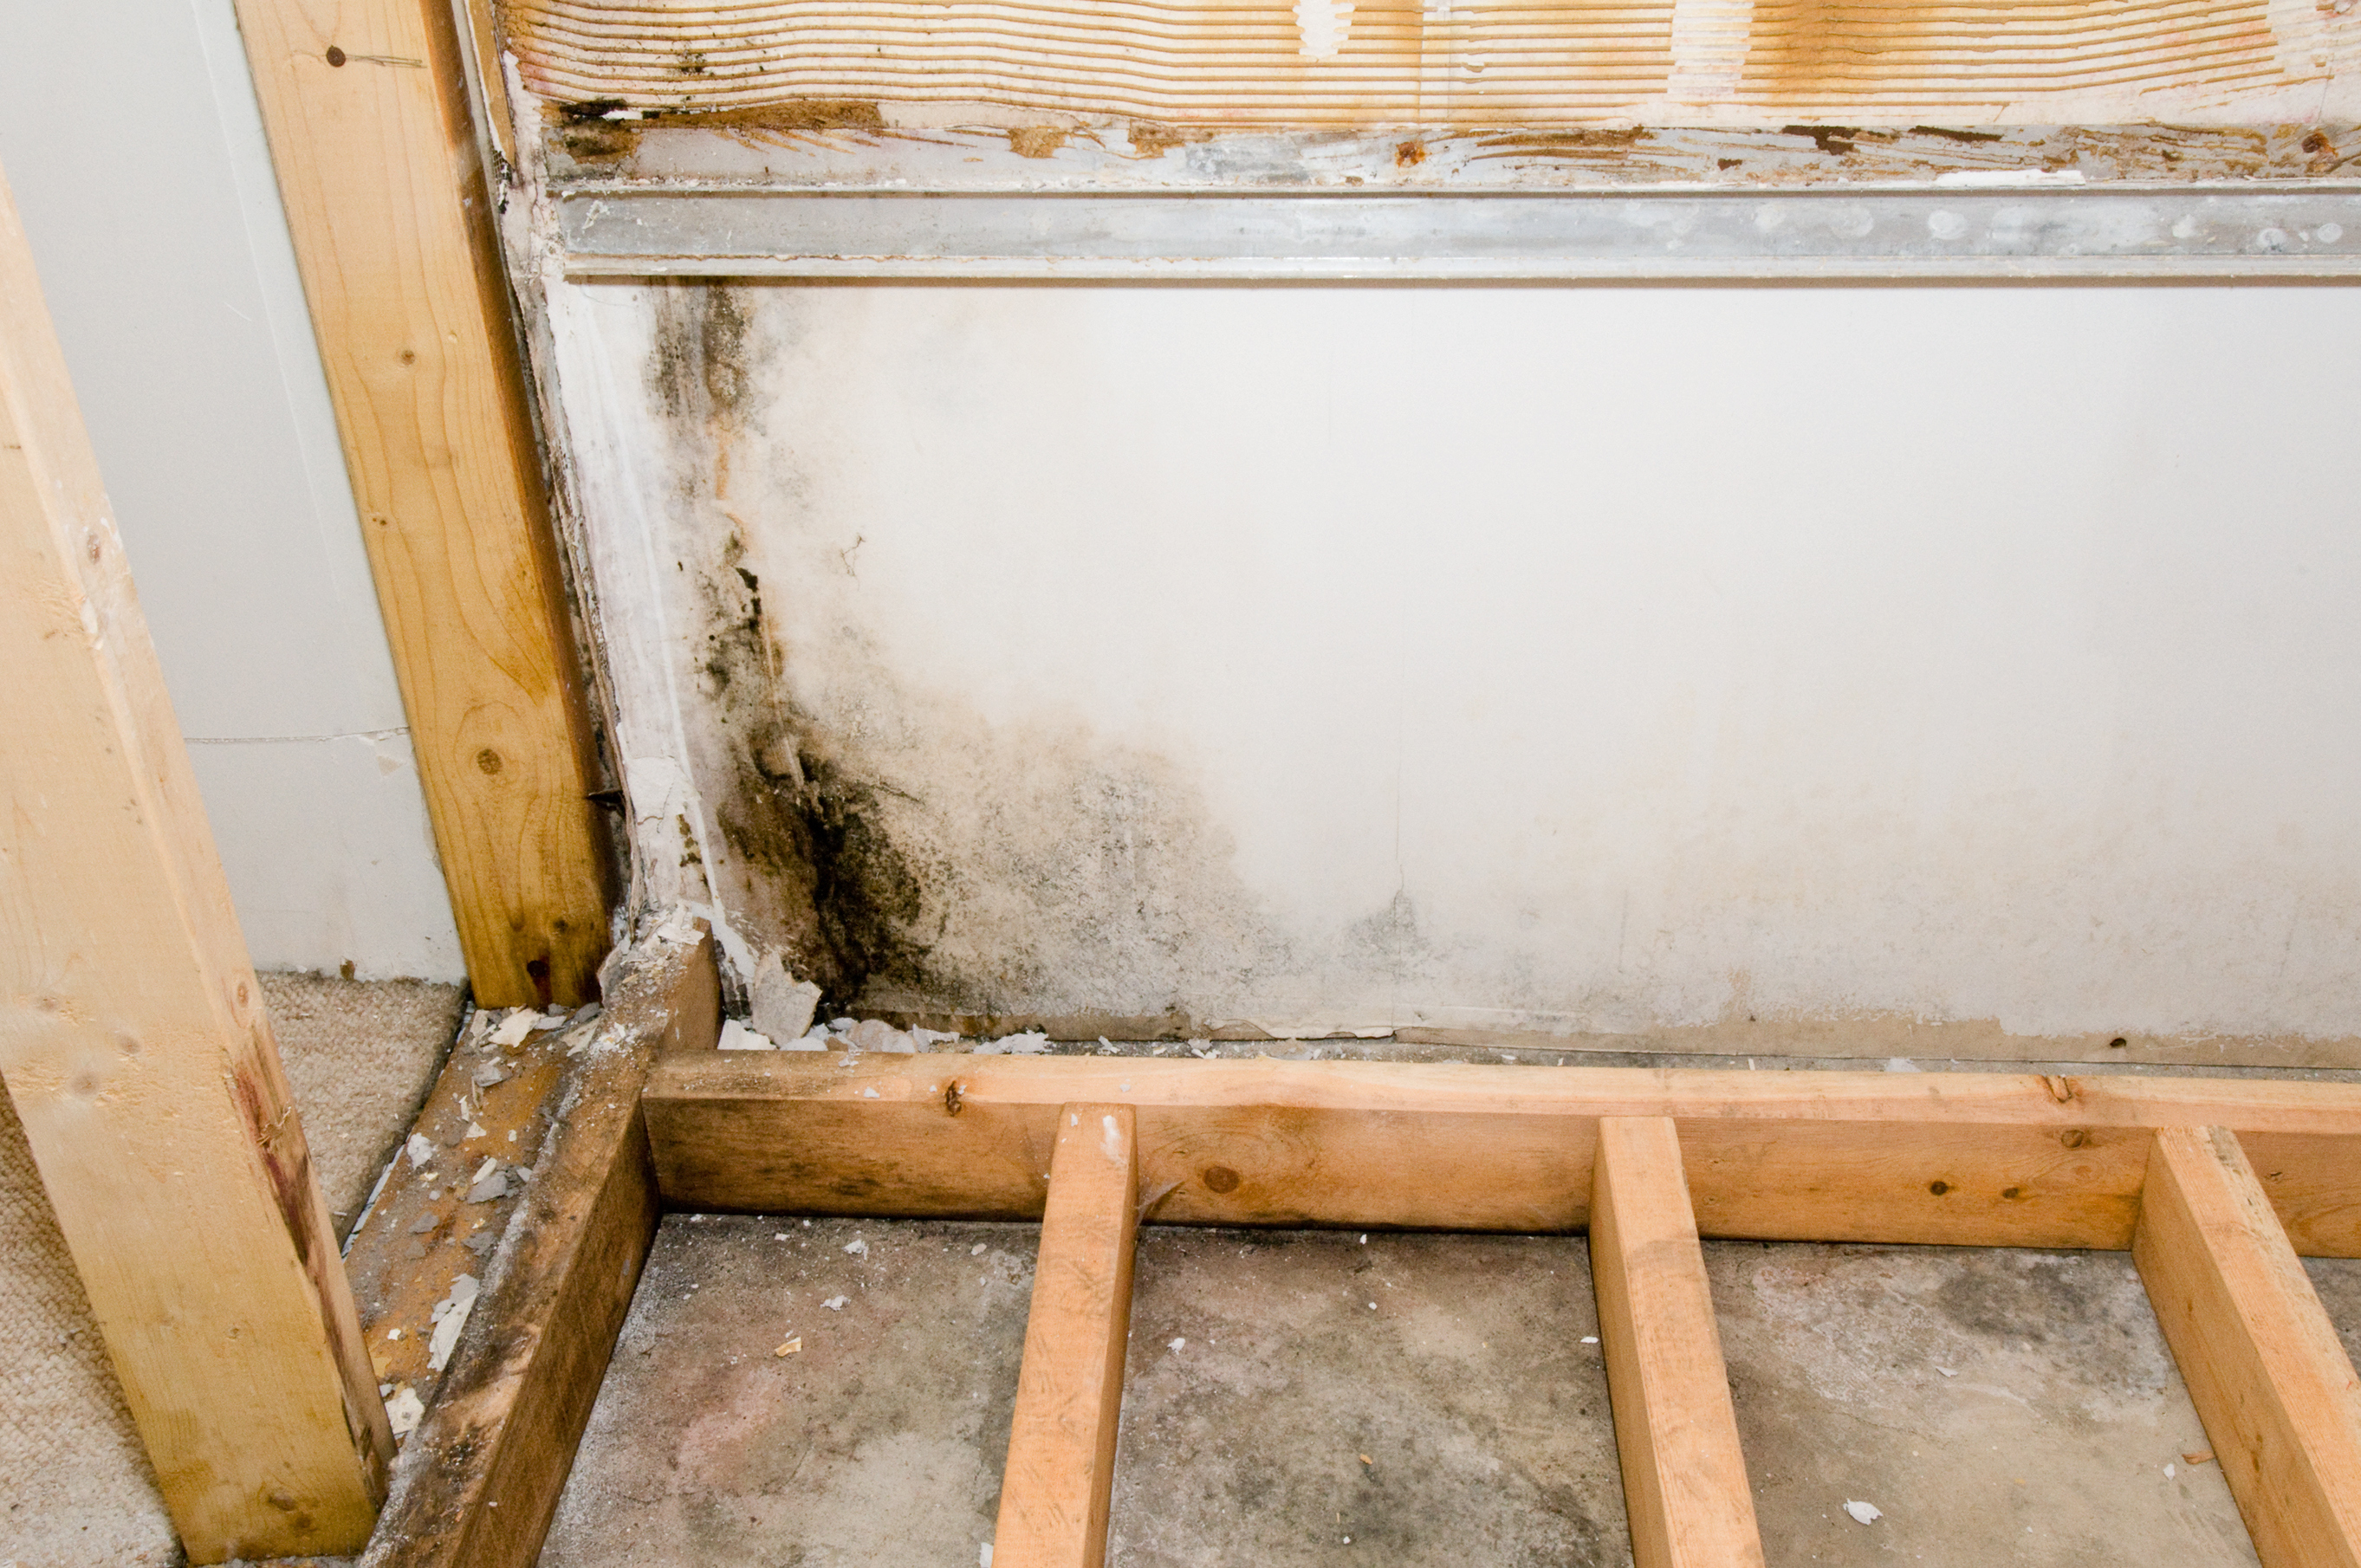 Mold growth on a wall behind removed baseboards with visible wooden studs